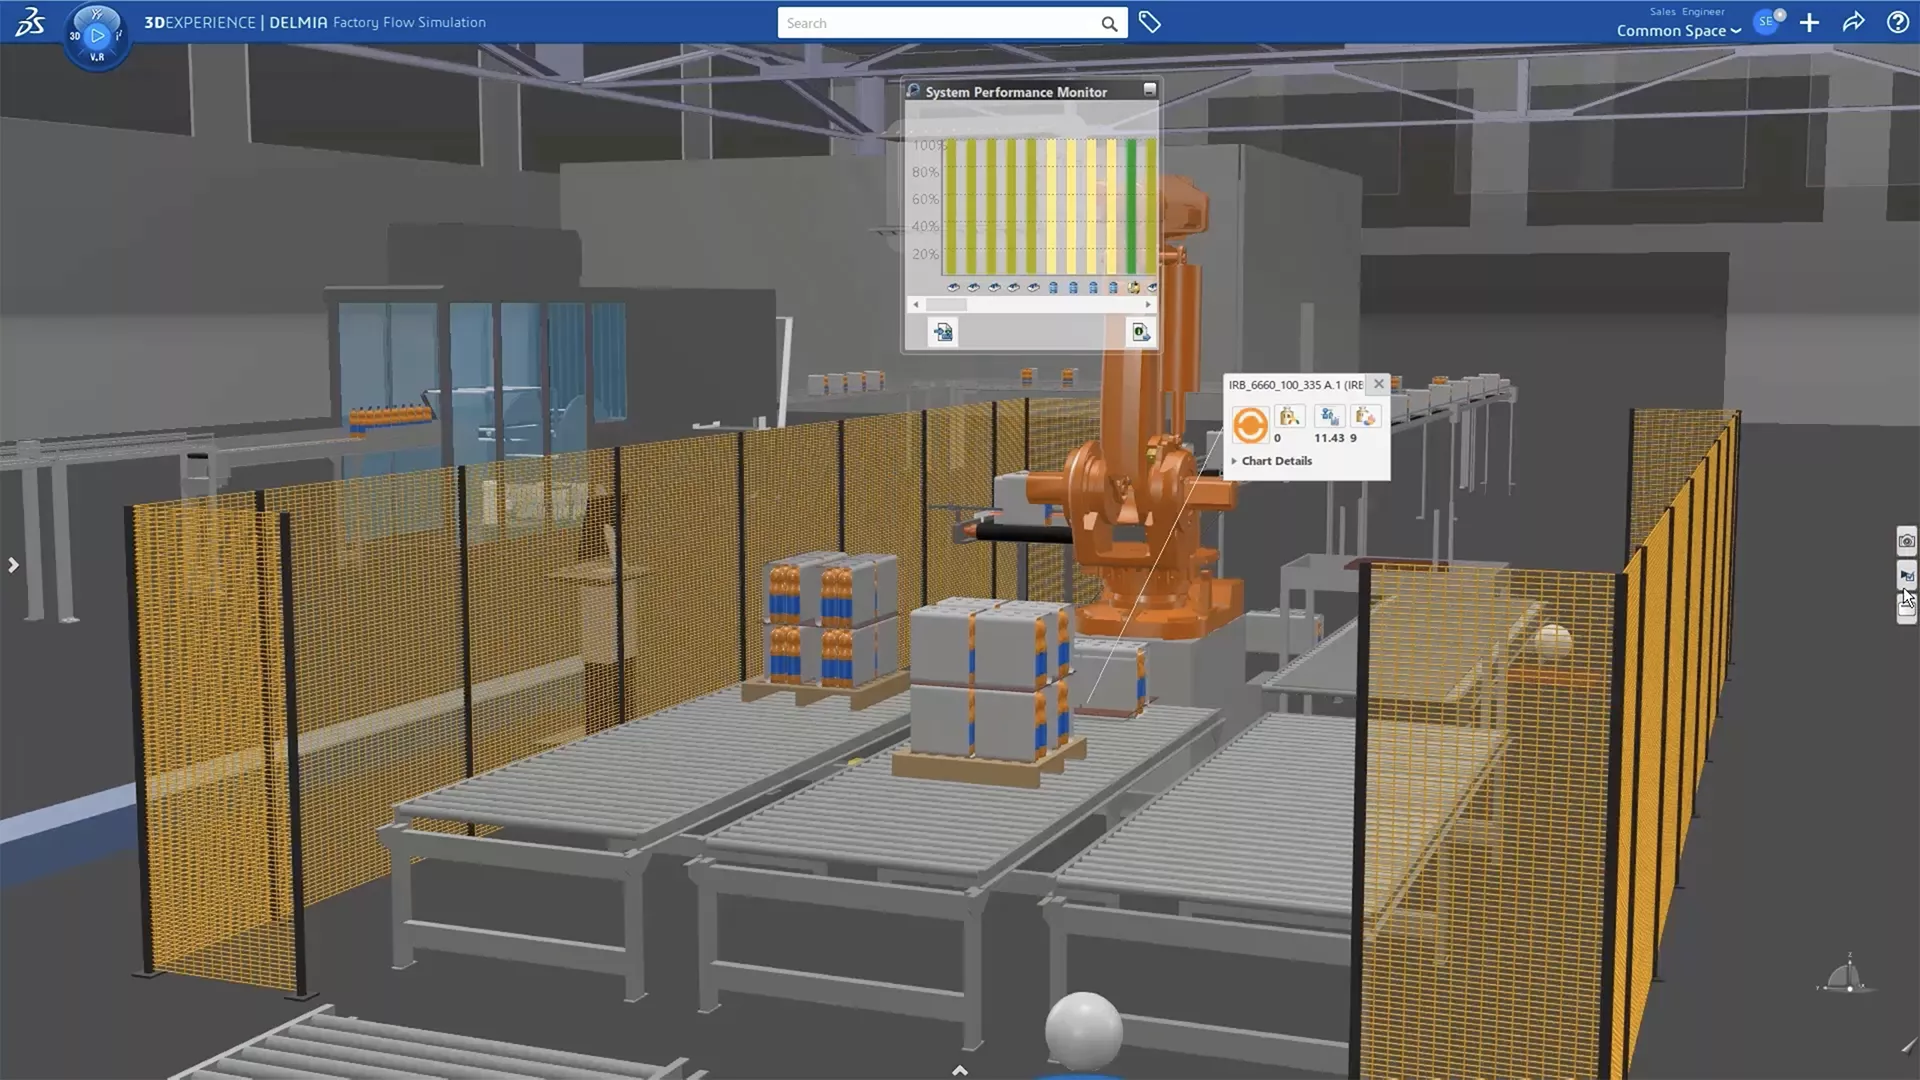 3DEXPERIENCE VIRTUAL FACTORY is a digital twin approach to manufacturing process optimization.